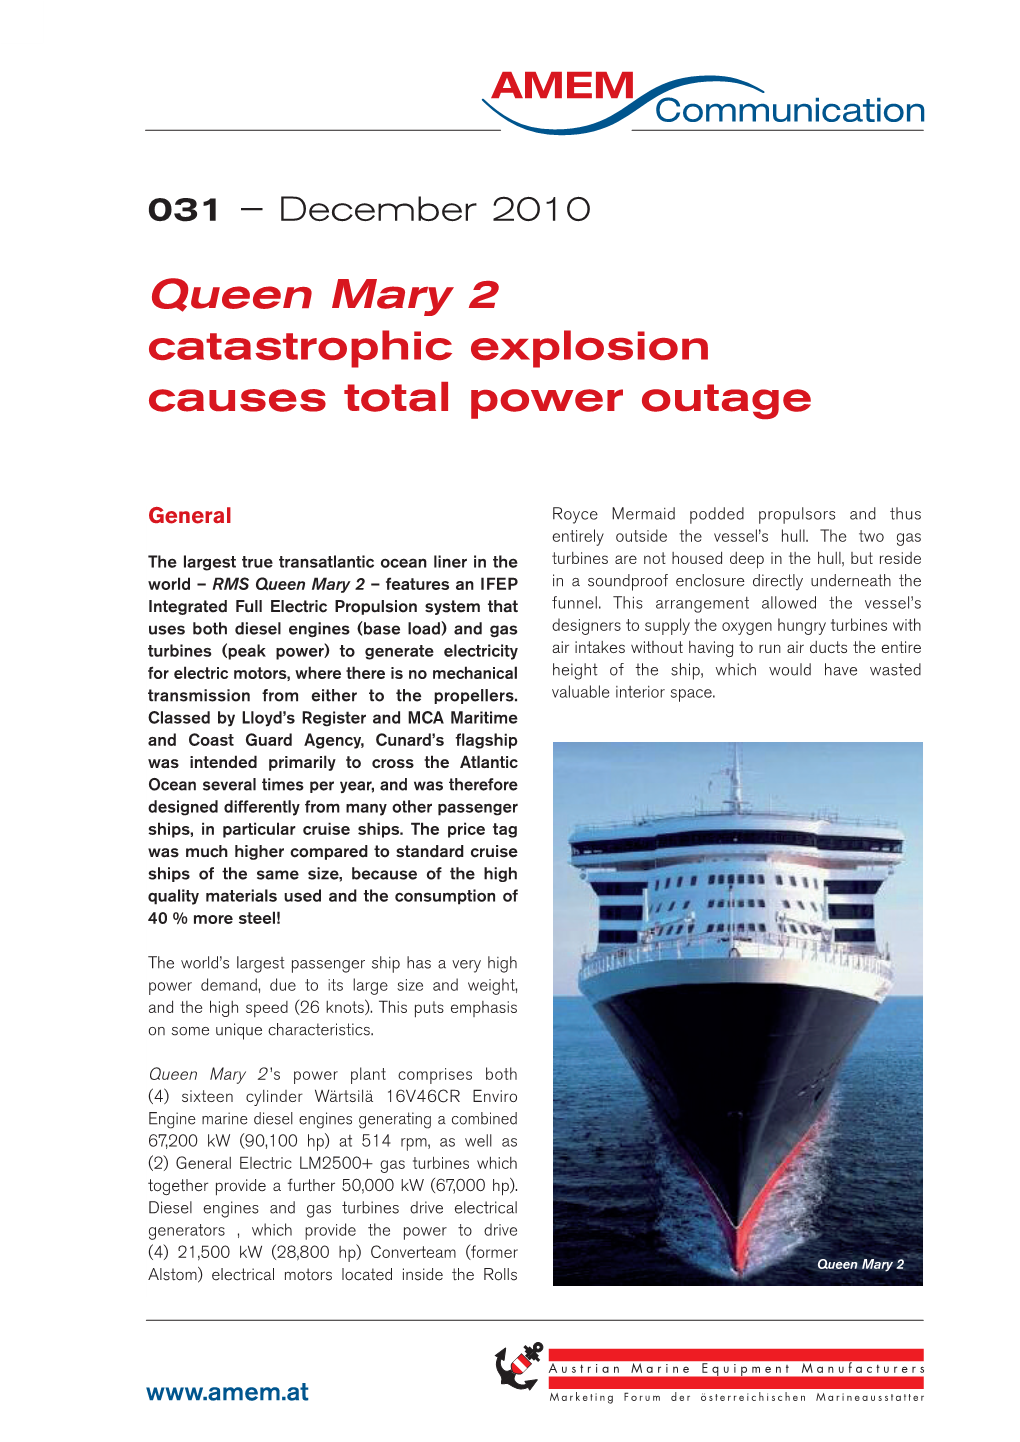 Queen Mary 2 Catastrophic Explosion Causes Total Power Outage